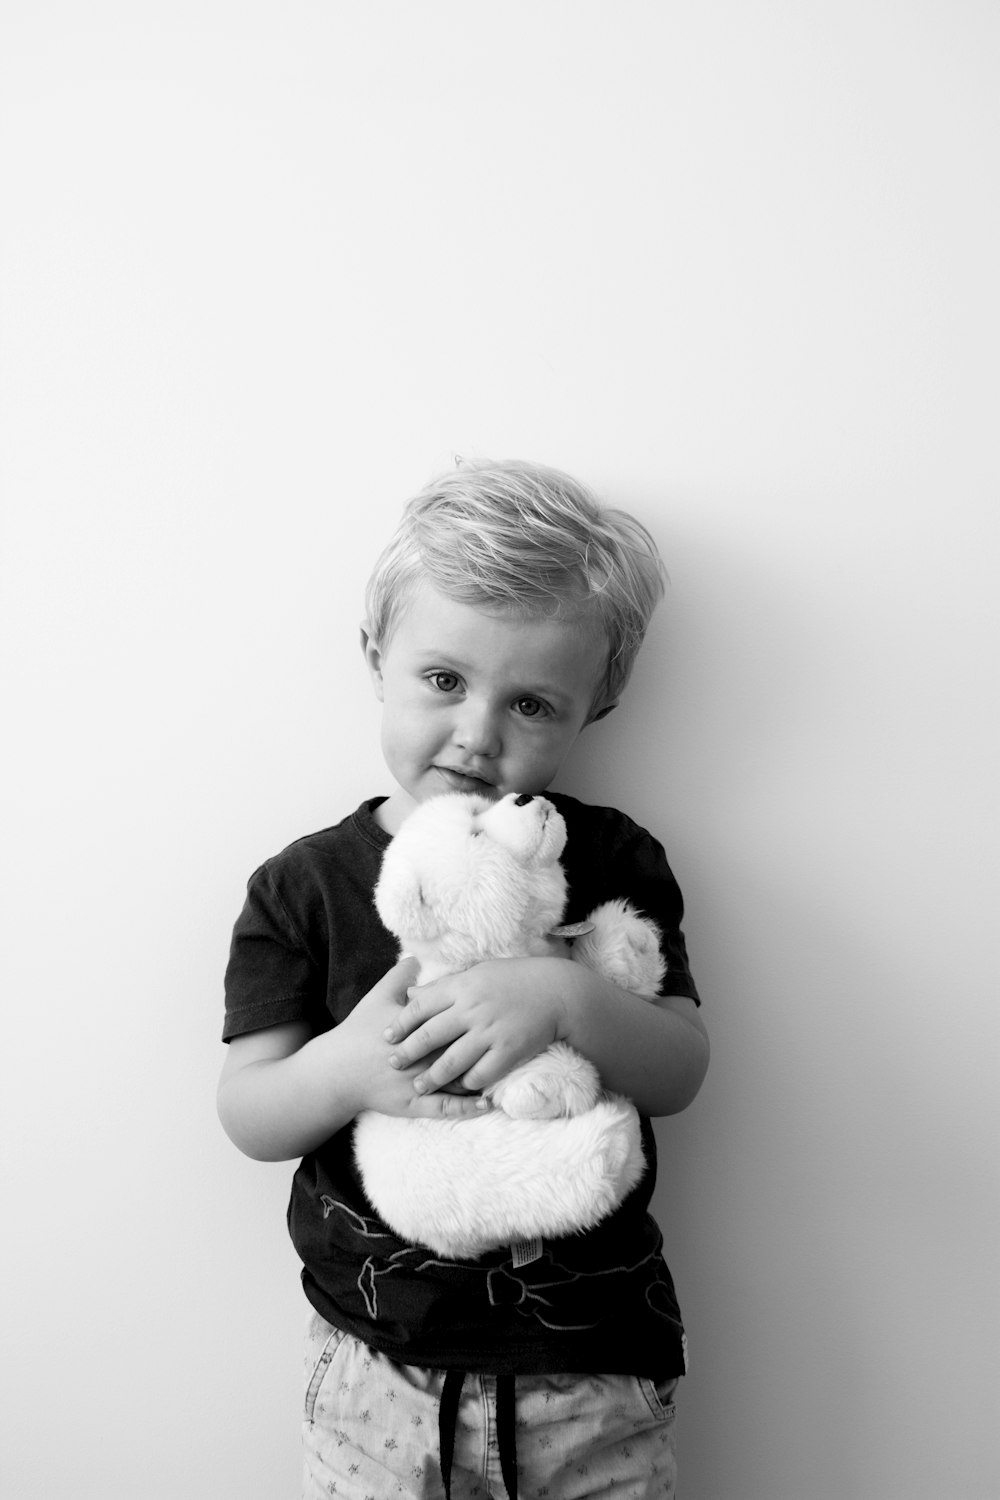 Beautiful Child Pictures | Download Free Images on Unsplash